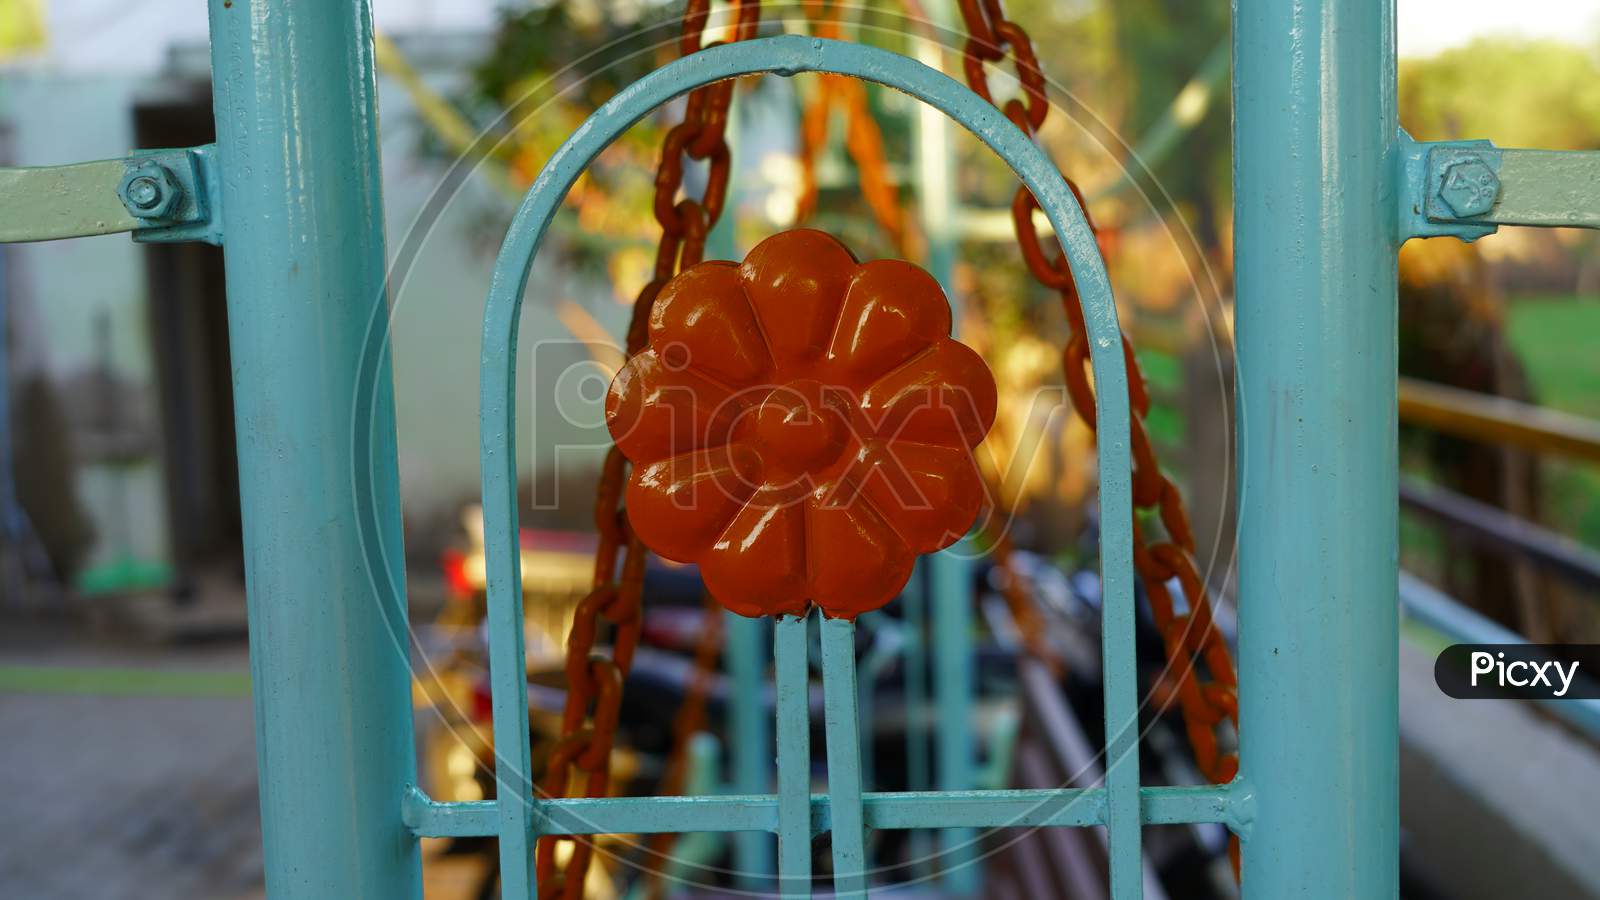 The Fragment Of New Decorated Iron Fence Security Gate View. Attractive Red Colored Round Design In Iron Fence.